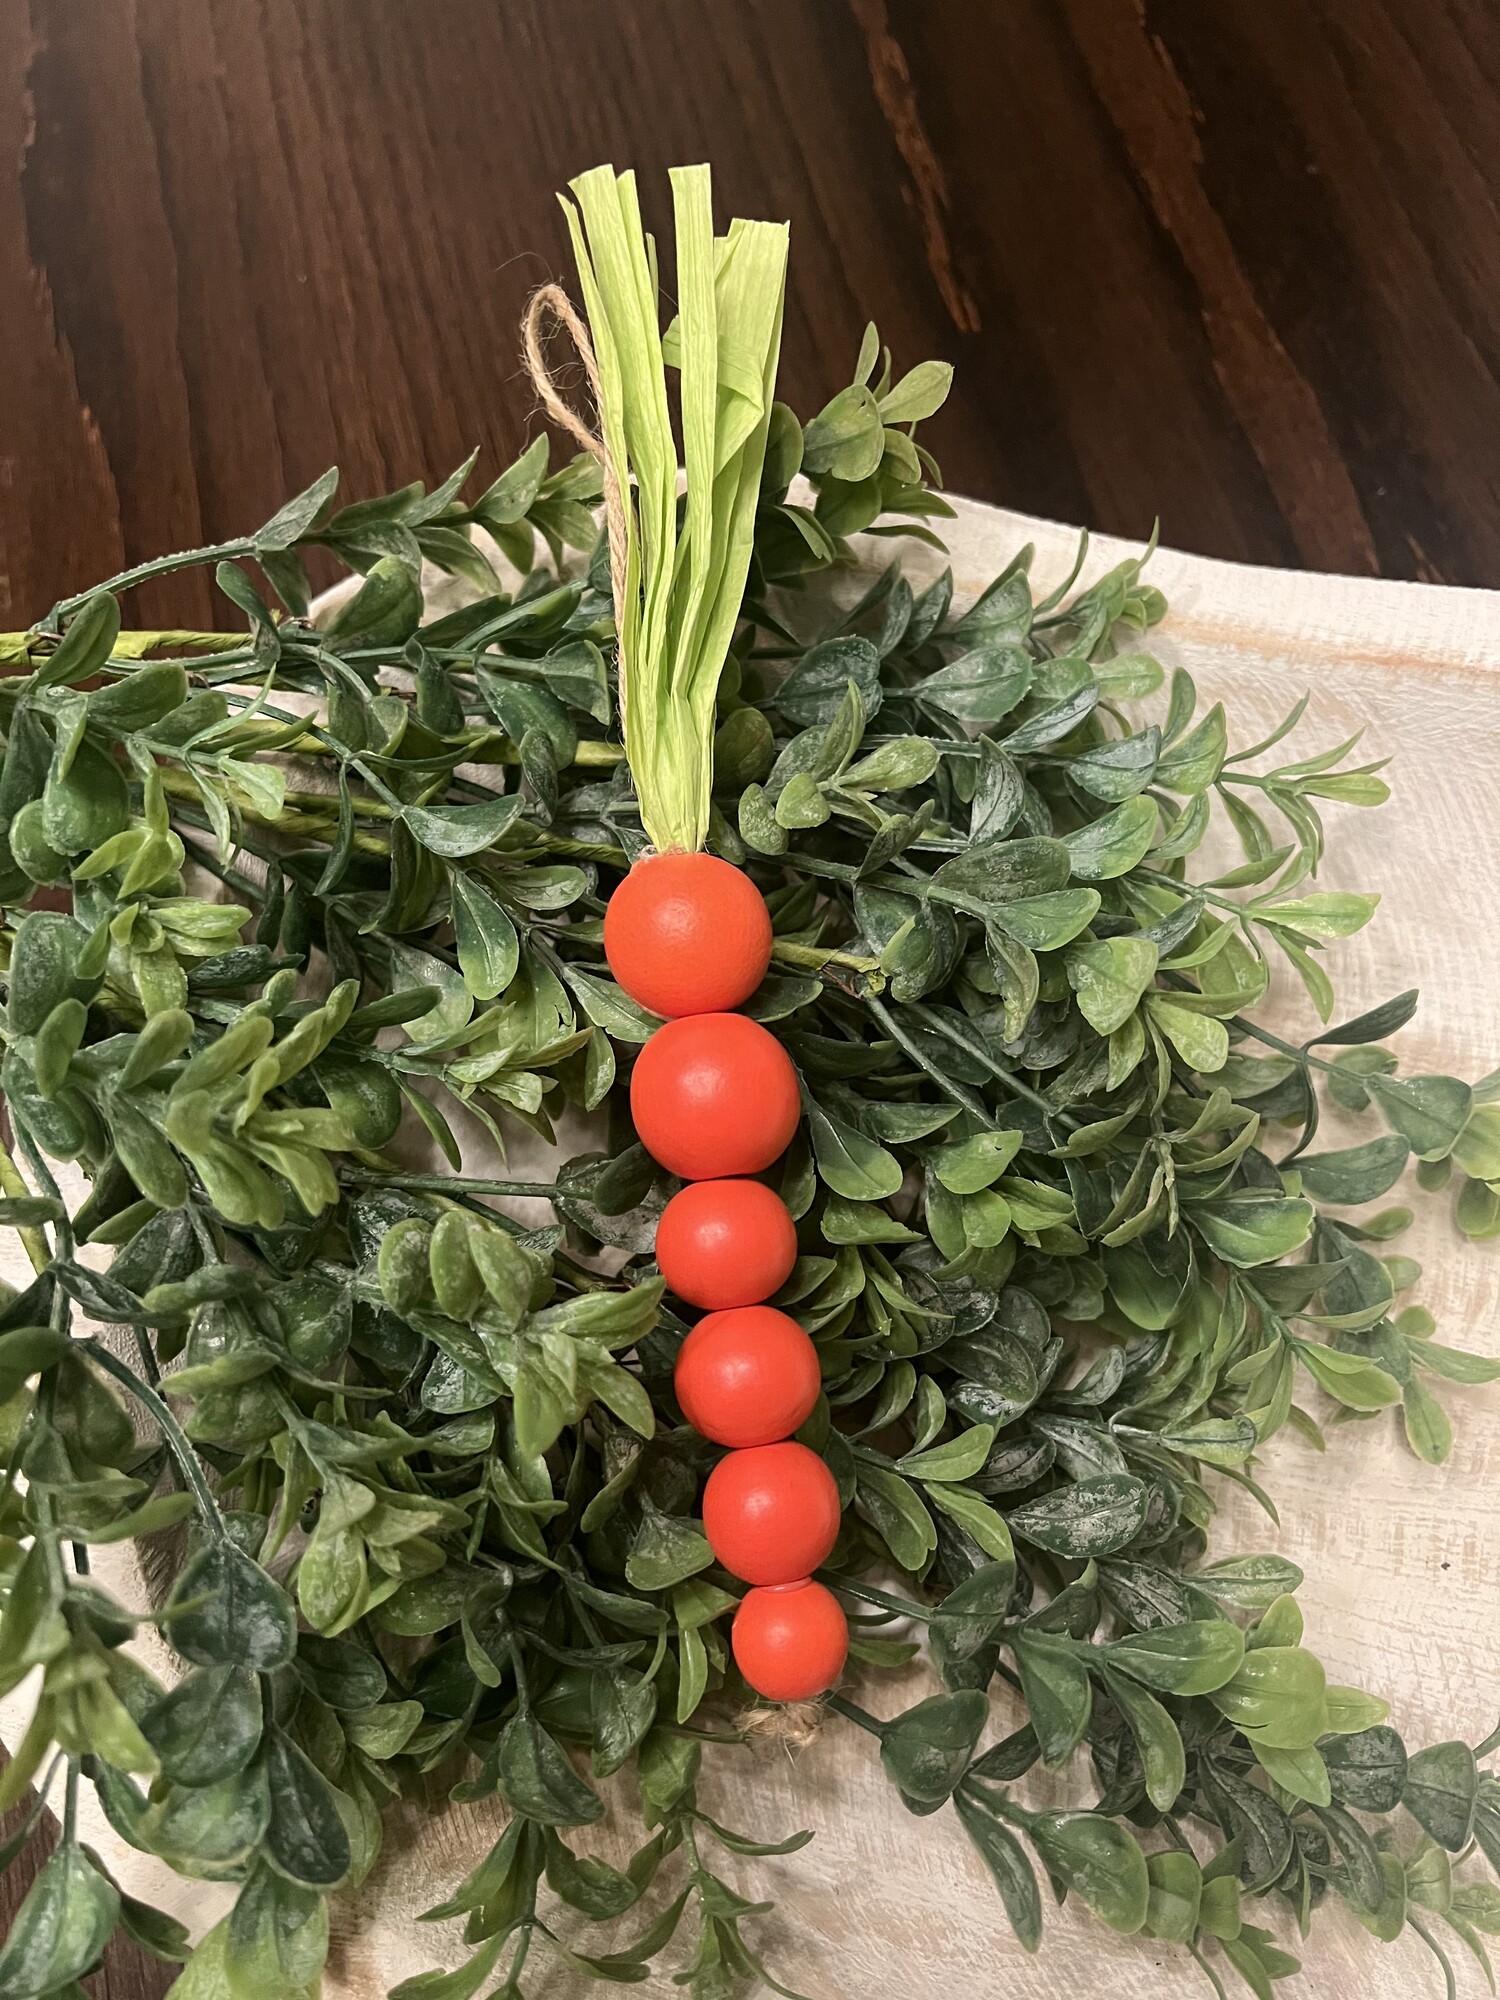 These adorable beaded carrots are 8 inches in length and match well with any Easter decor. Use in baskets; tiered trays; centerpieces or give as gifts to family or friends